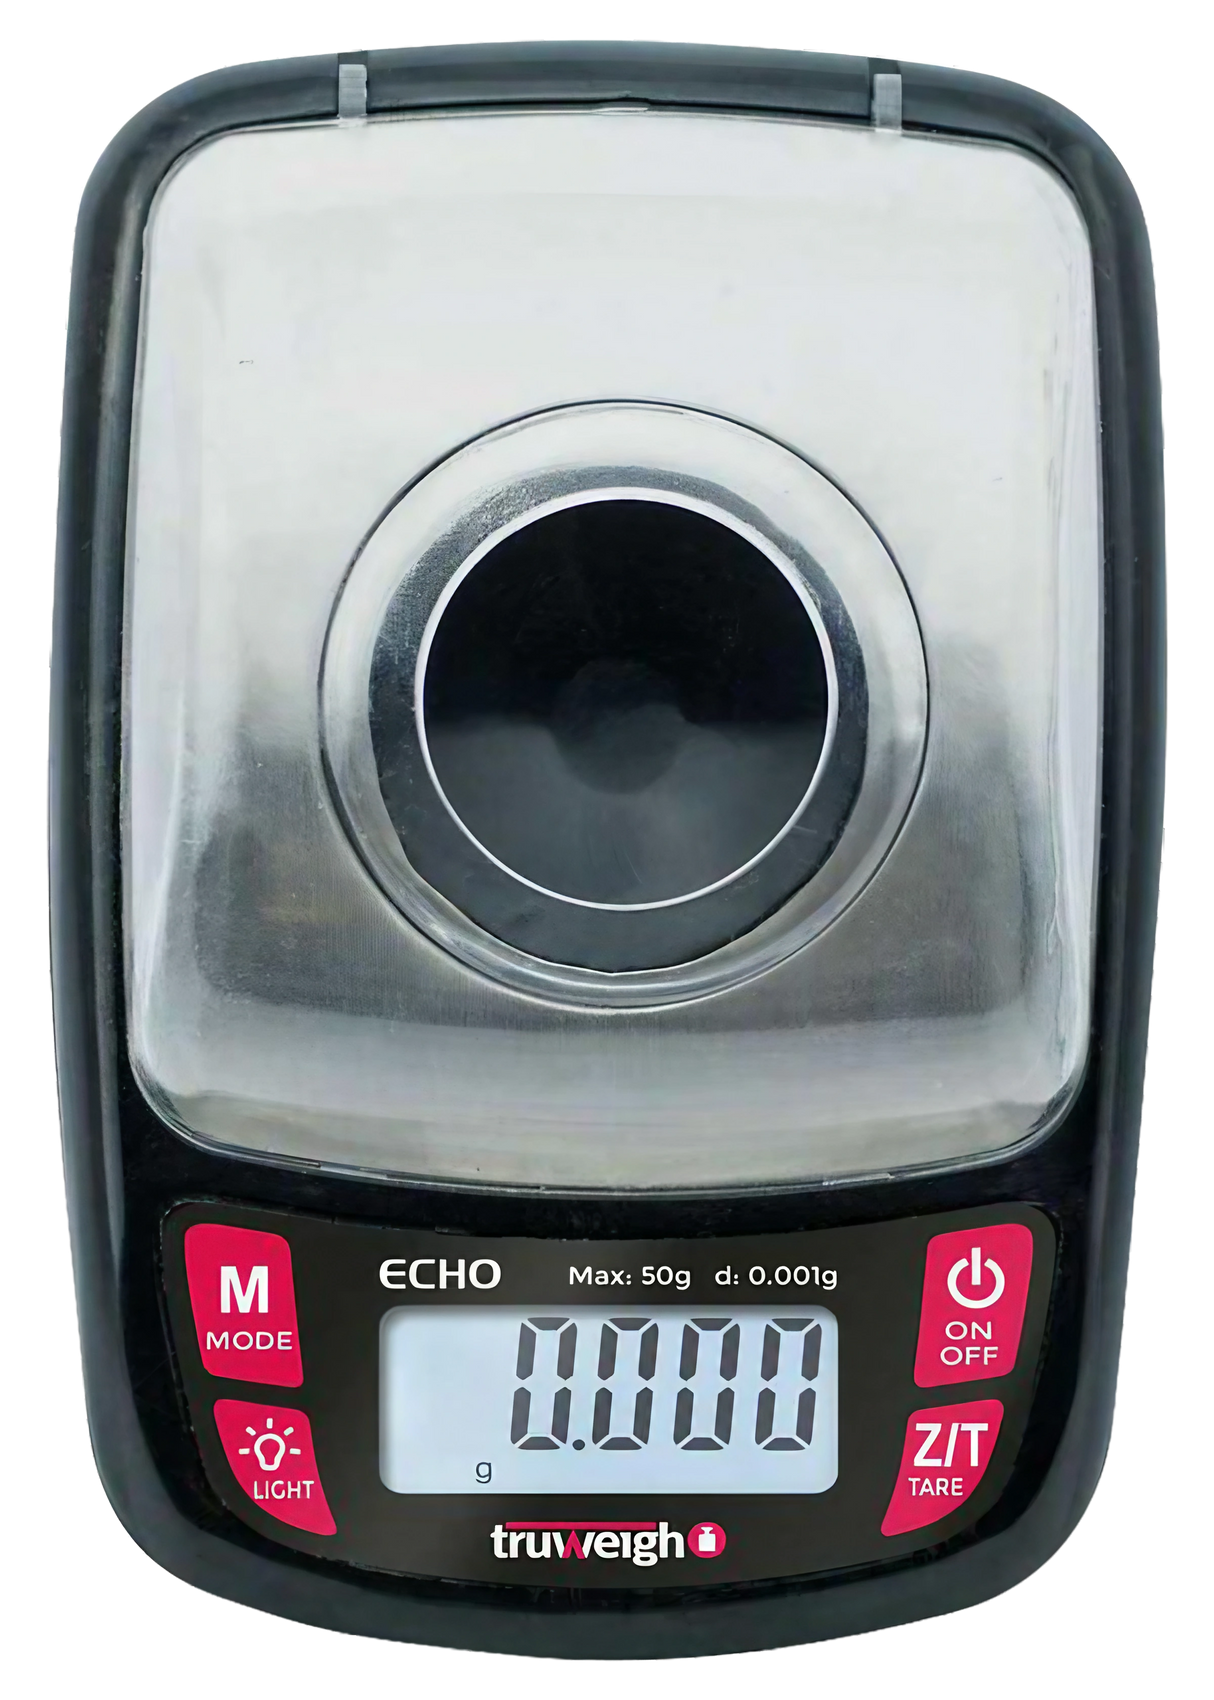 Truweigh Echo Precision Digital Scale - 50g Capacity with 0.001g Accuracy